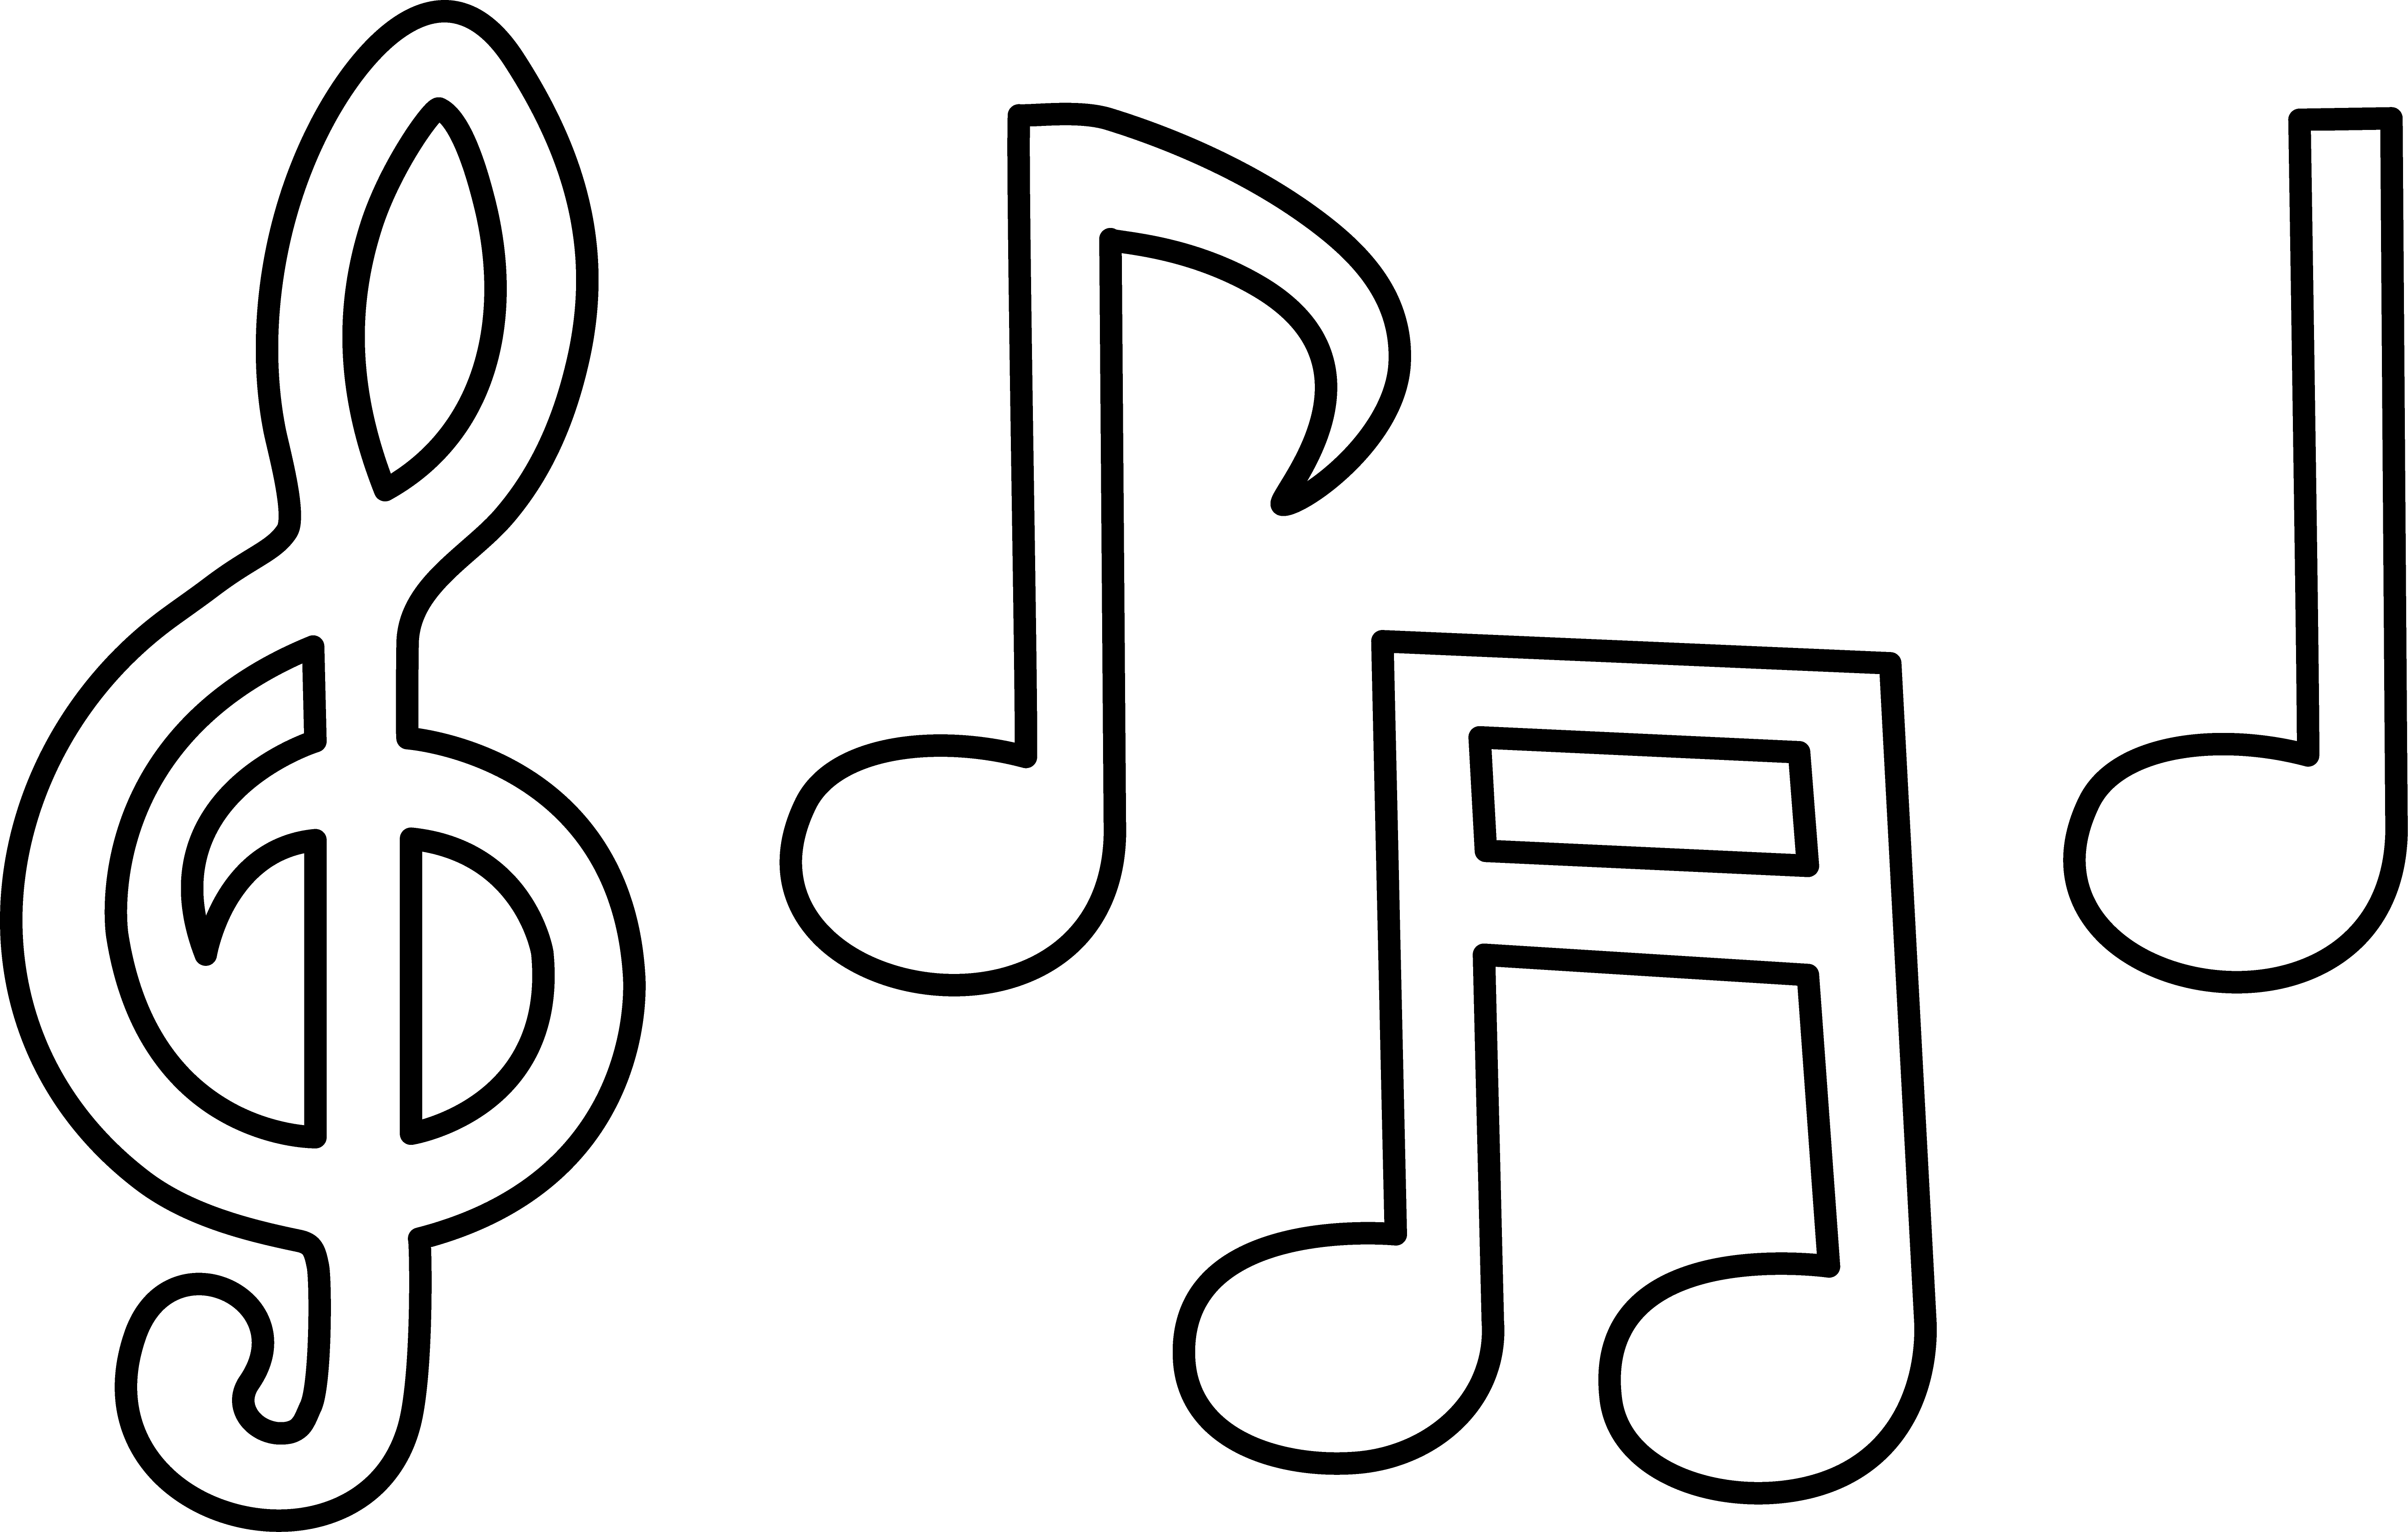 Free Music Note Drawings Download Free Clip Art Free Clip Art On Clipart Library Check out our music drawings selection for the very best in unique or custom, handmade pieces from our wall hangings shops. free music note drawings download free clip art free clip art on clipart library